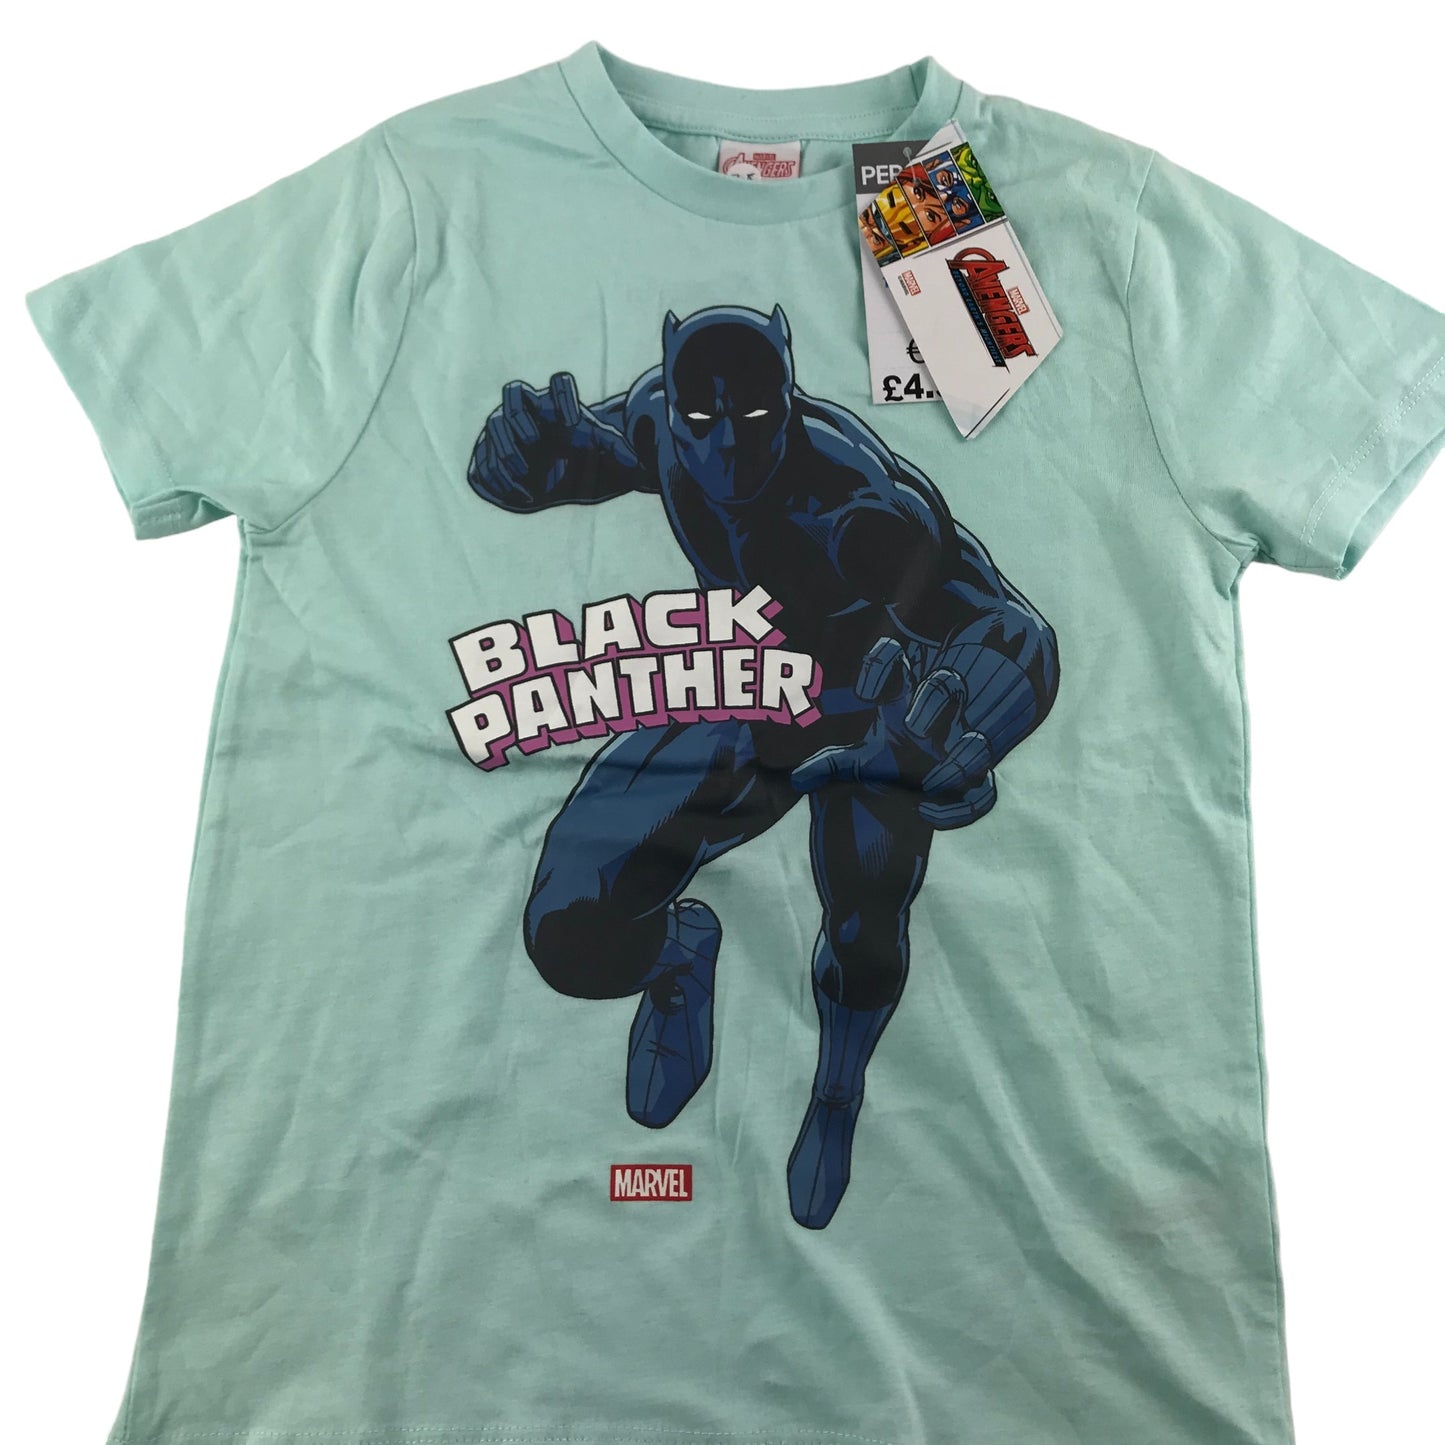 PEP&Co T-Shirt Age 7 Light Blue Short Sleeve Black Panther Graphic